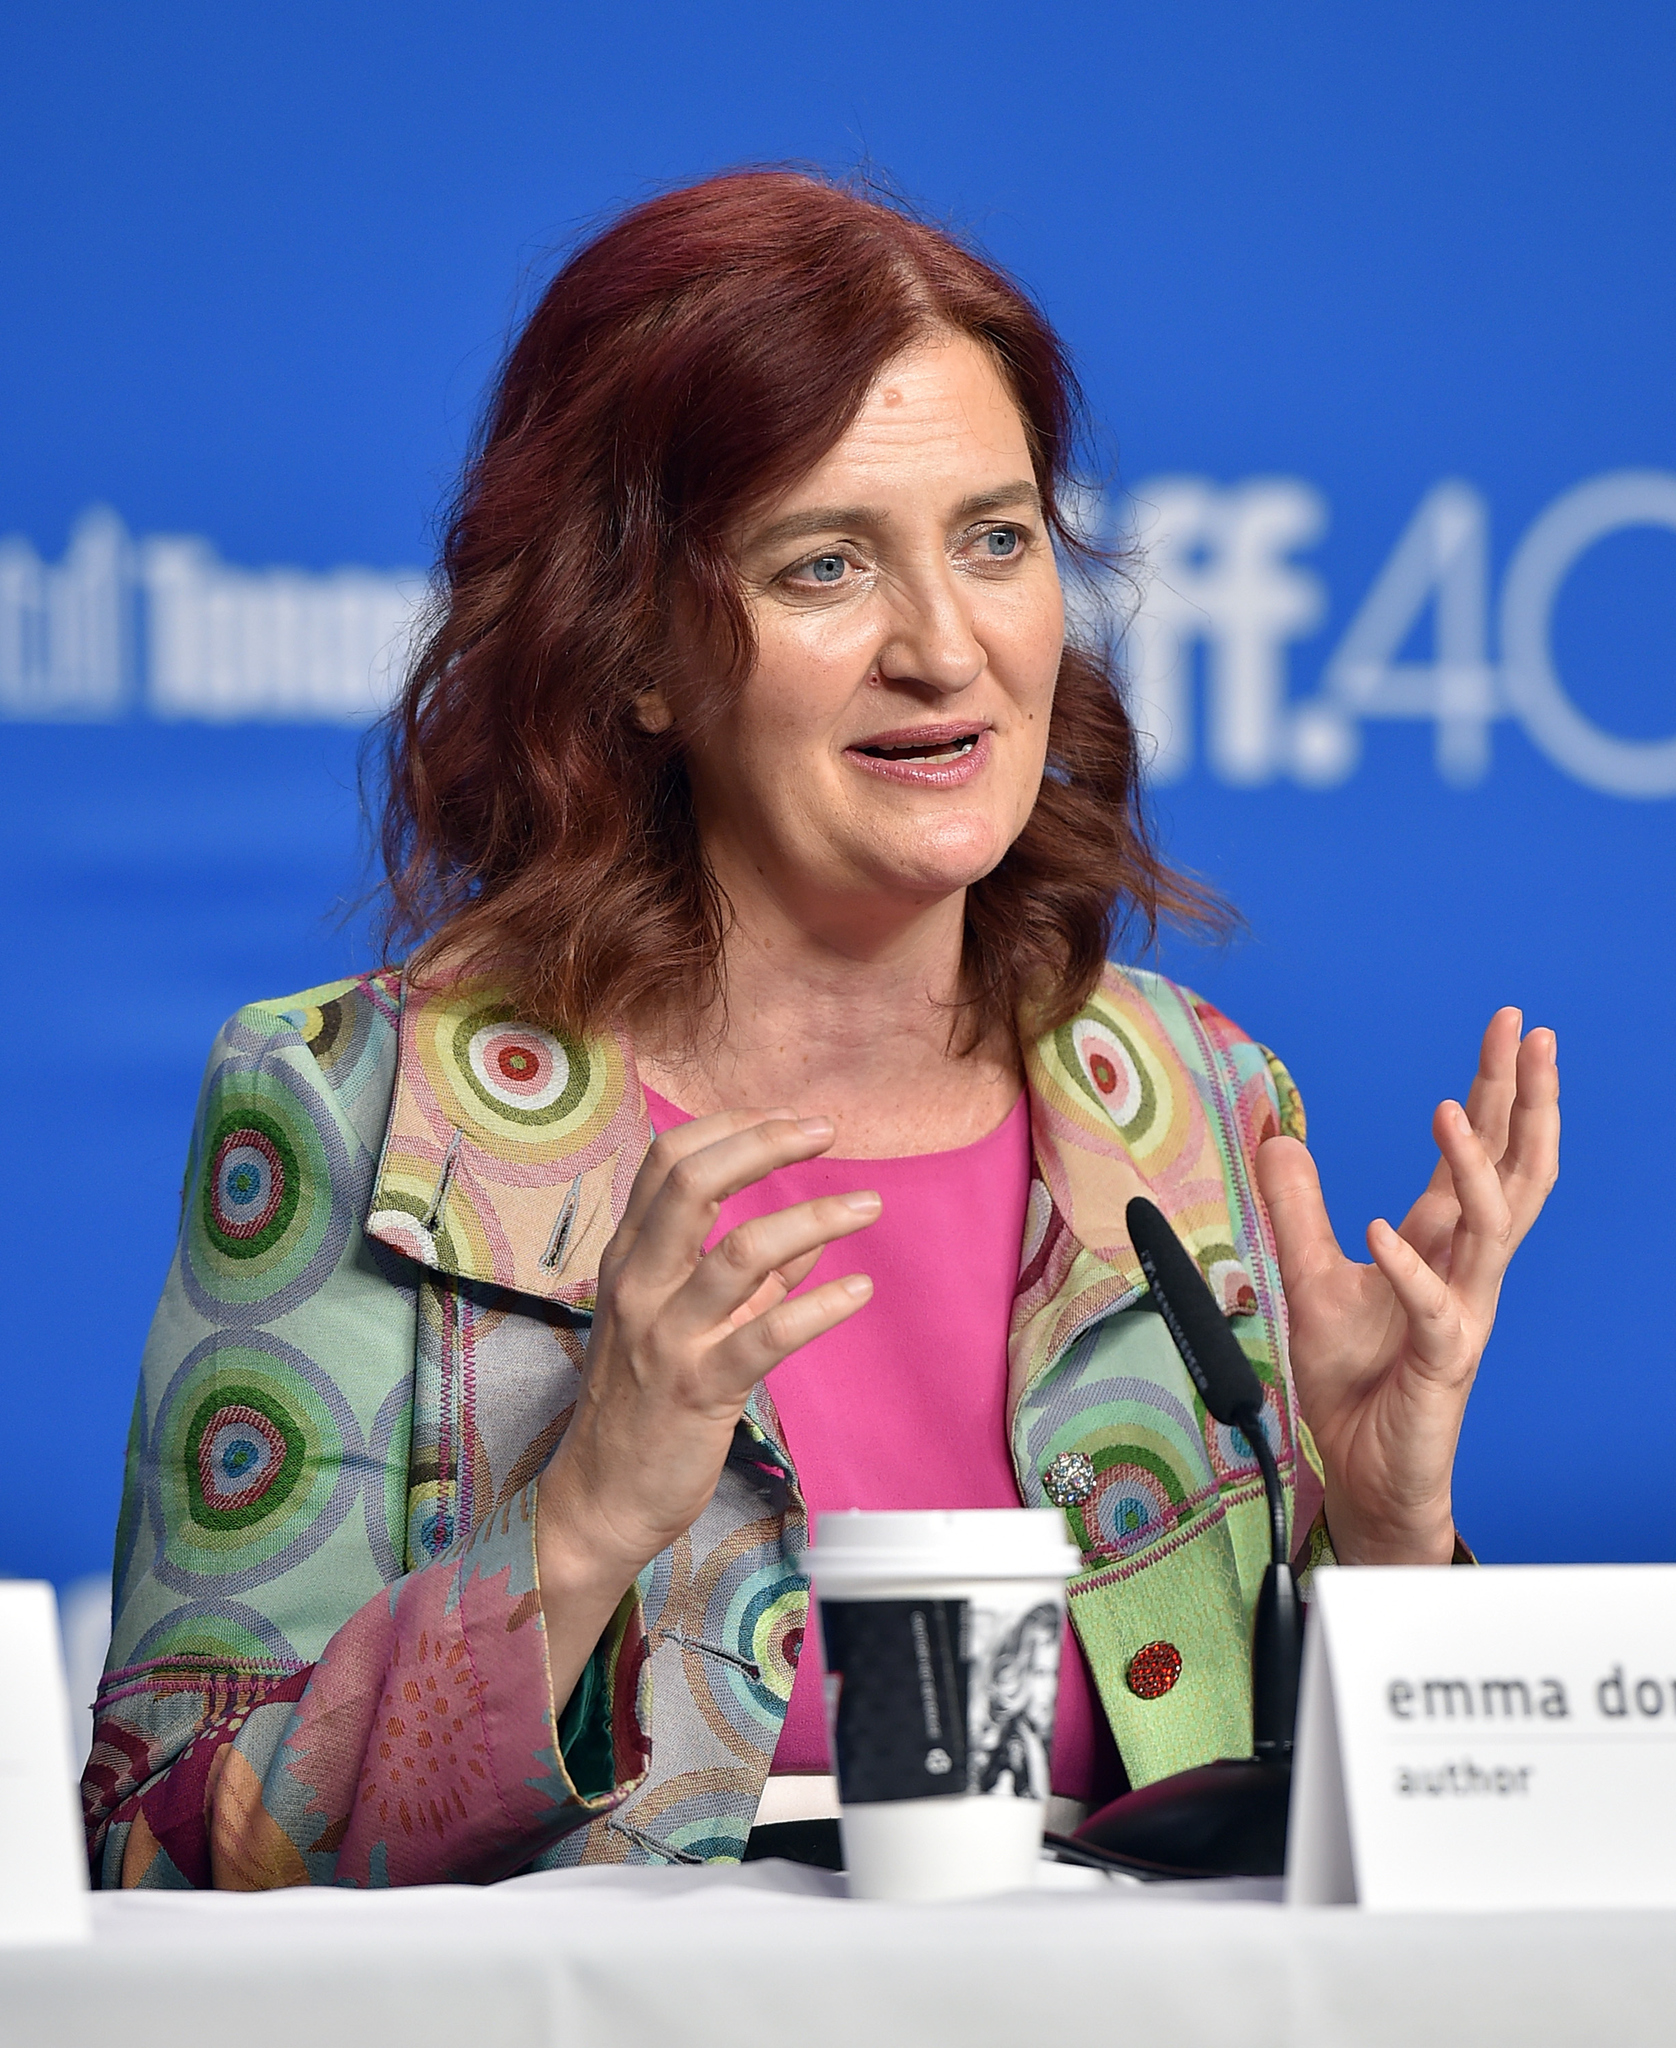 Emma Donoghue at event of Room (2015)